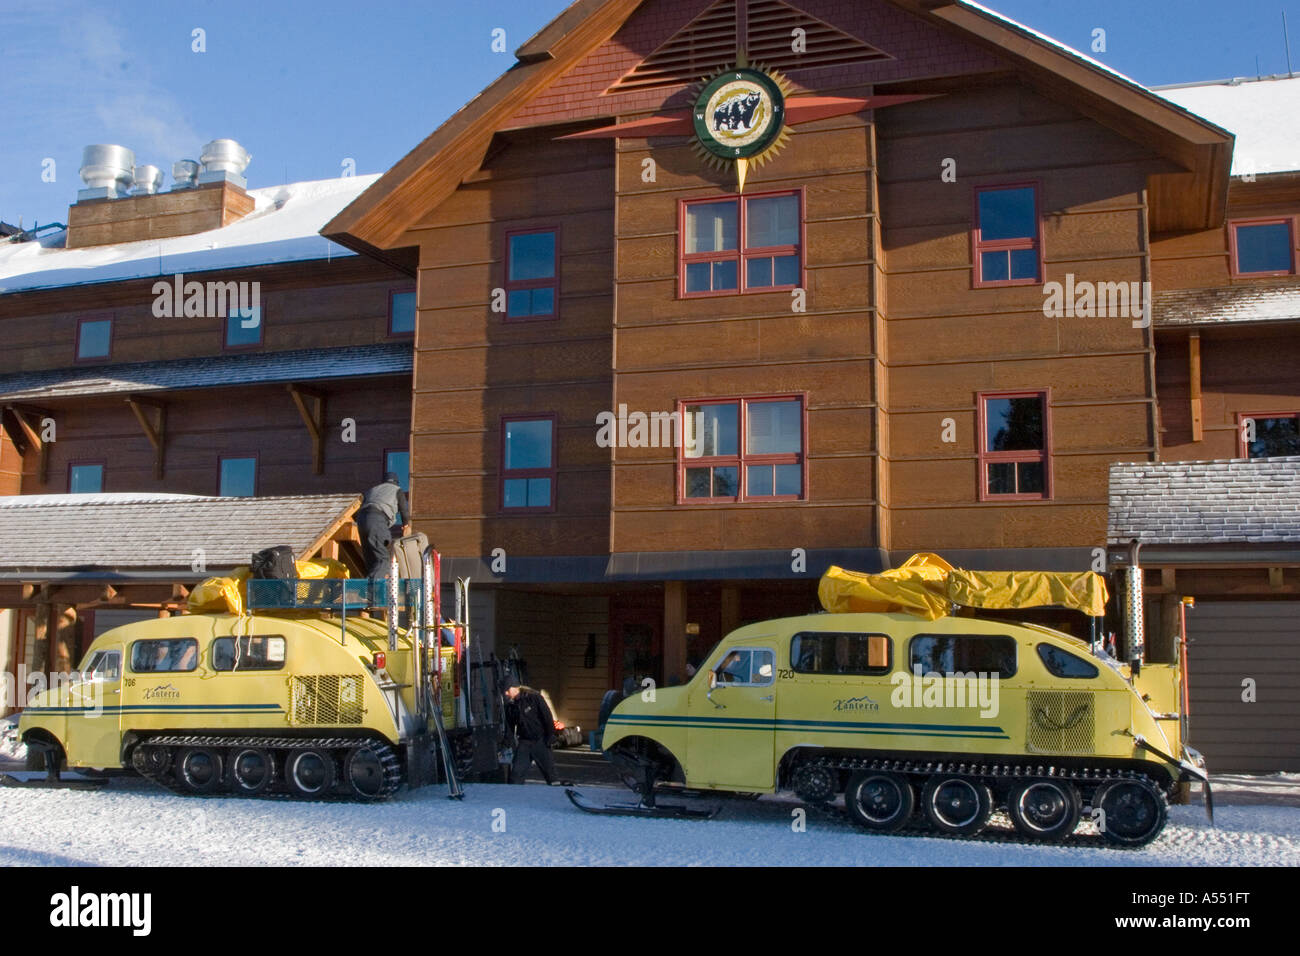 https://c8.alamy.com/comp/A551FT/yellowstone-national-park-wyoming-bombardier-snowcoaches-at-the-old-A551FT.jpg